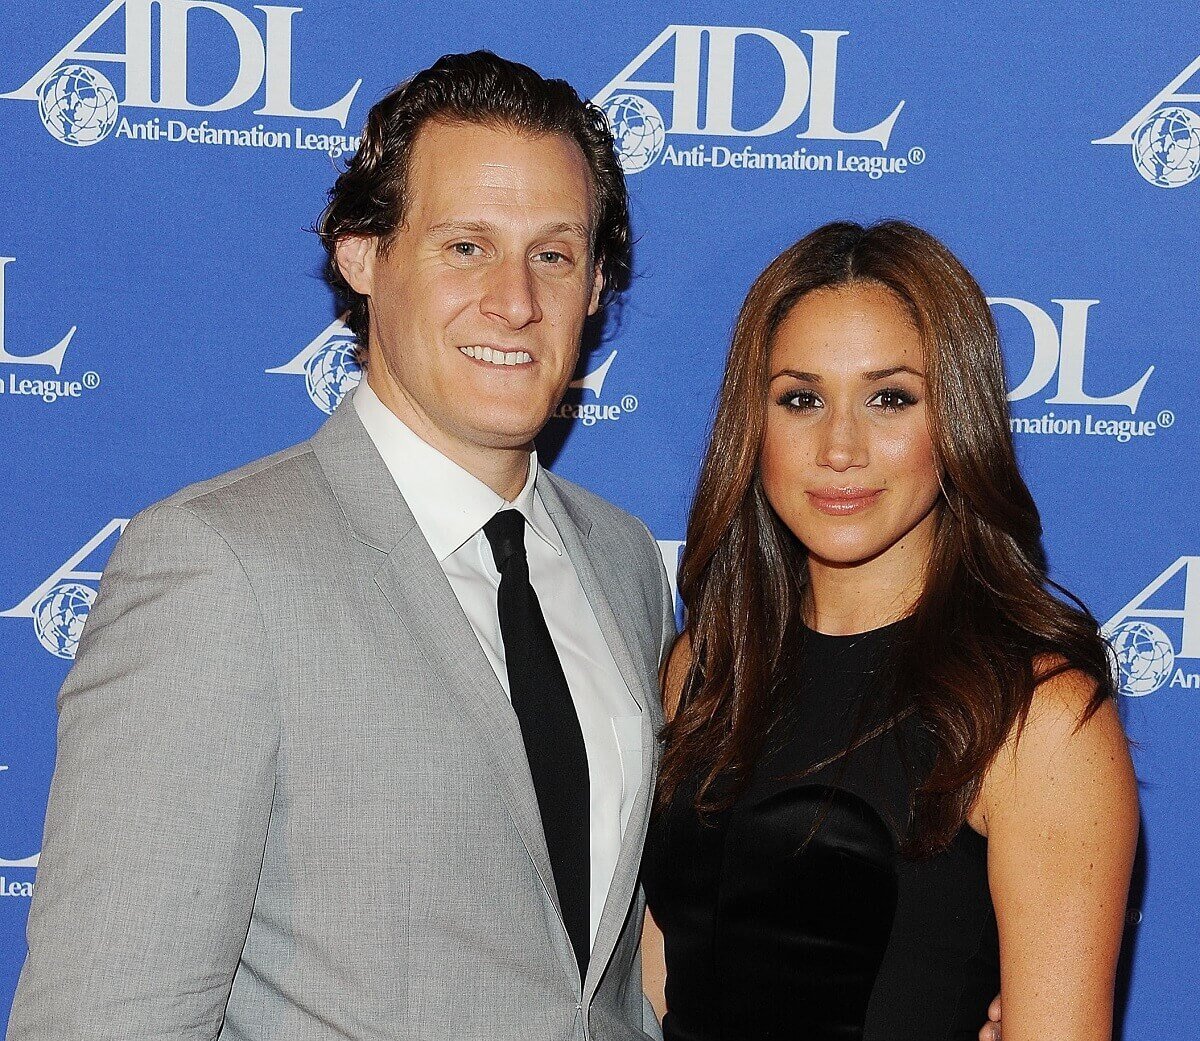 Trevor Engelson and Meghan Markle, who lived in an LA house with her ex-husband that was in location with a connection to Prince William and Kate, at the Anti-Defamation League Entertainment Industry Awards Dinner (2)